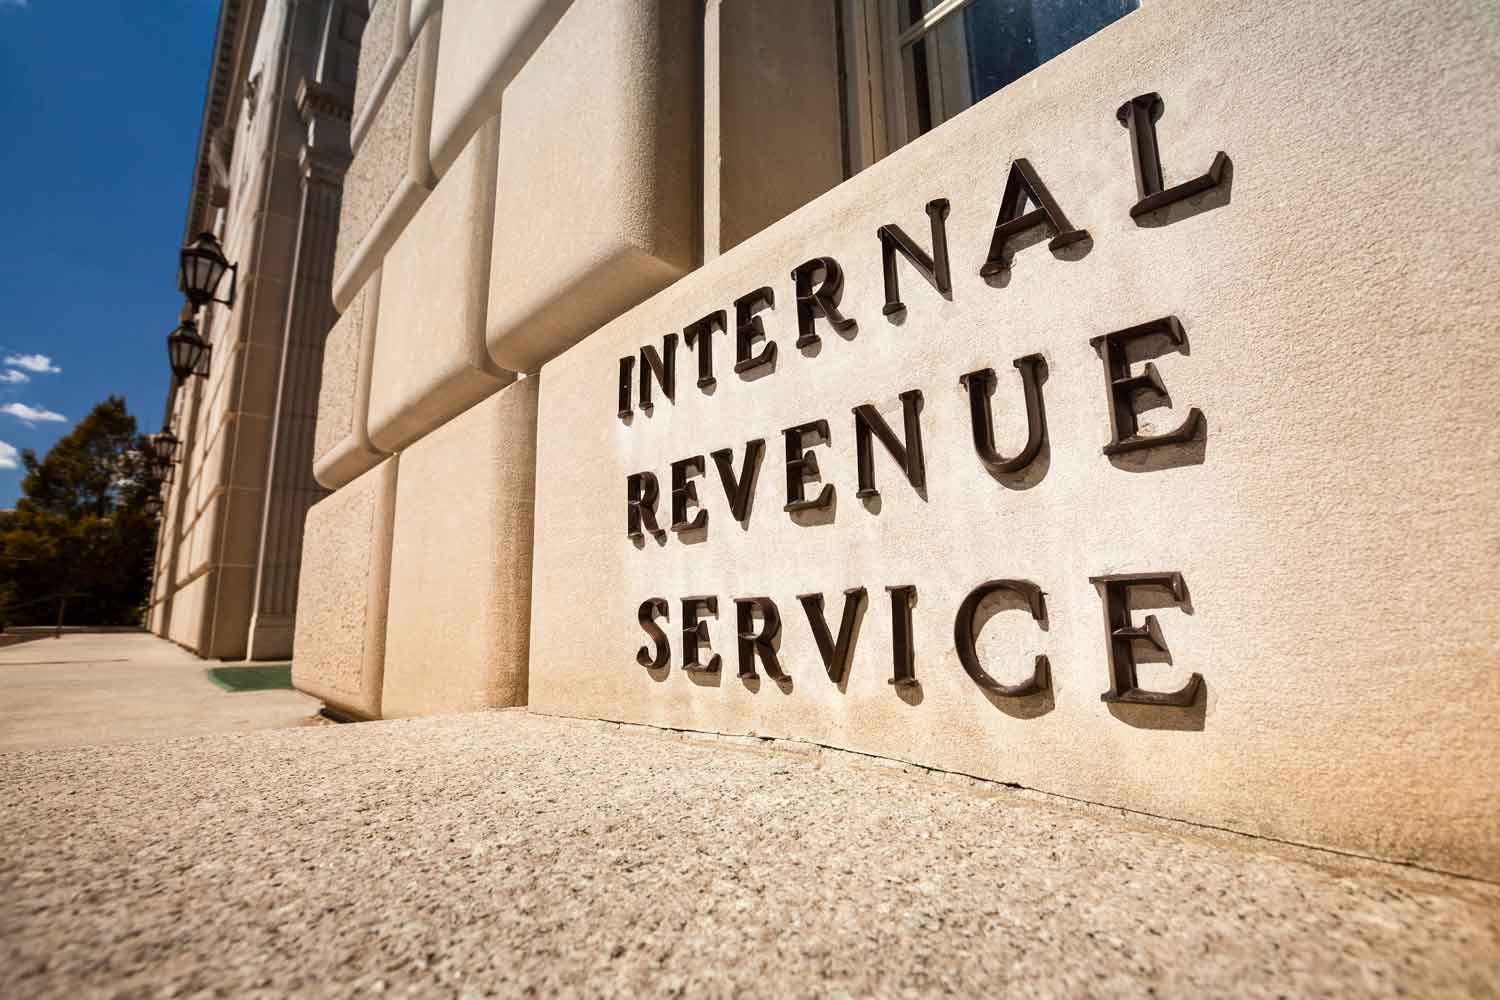 Low angle building photo with the words "Internal Revenue Service" on the side of the building